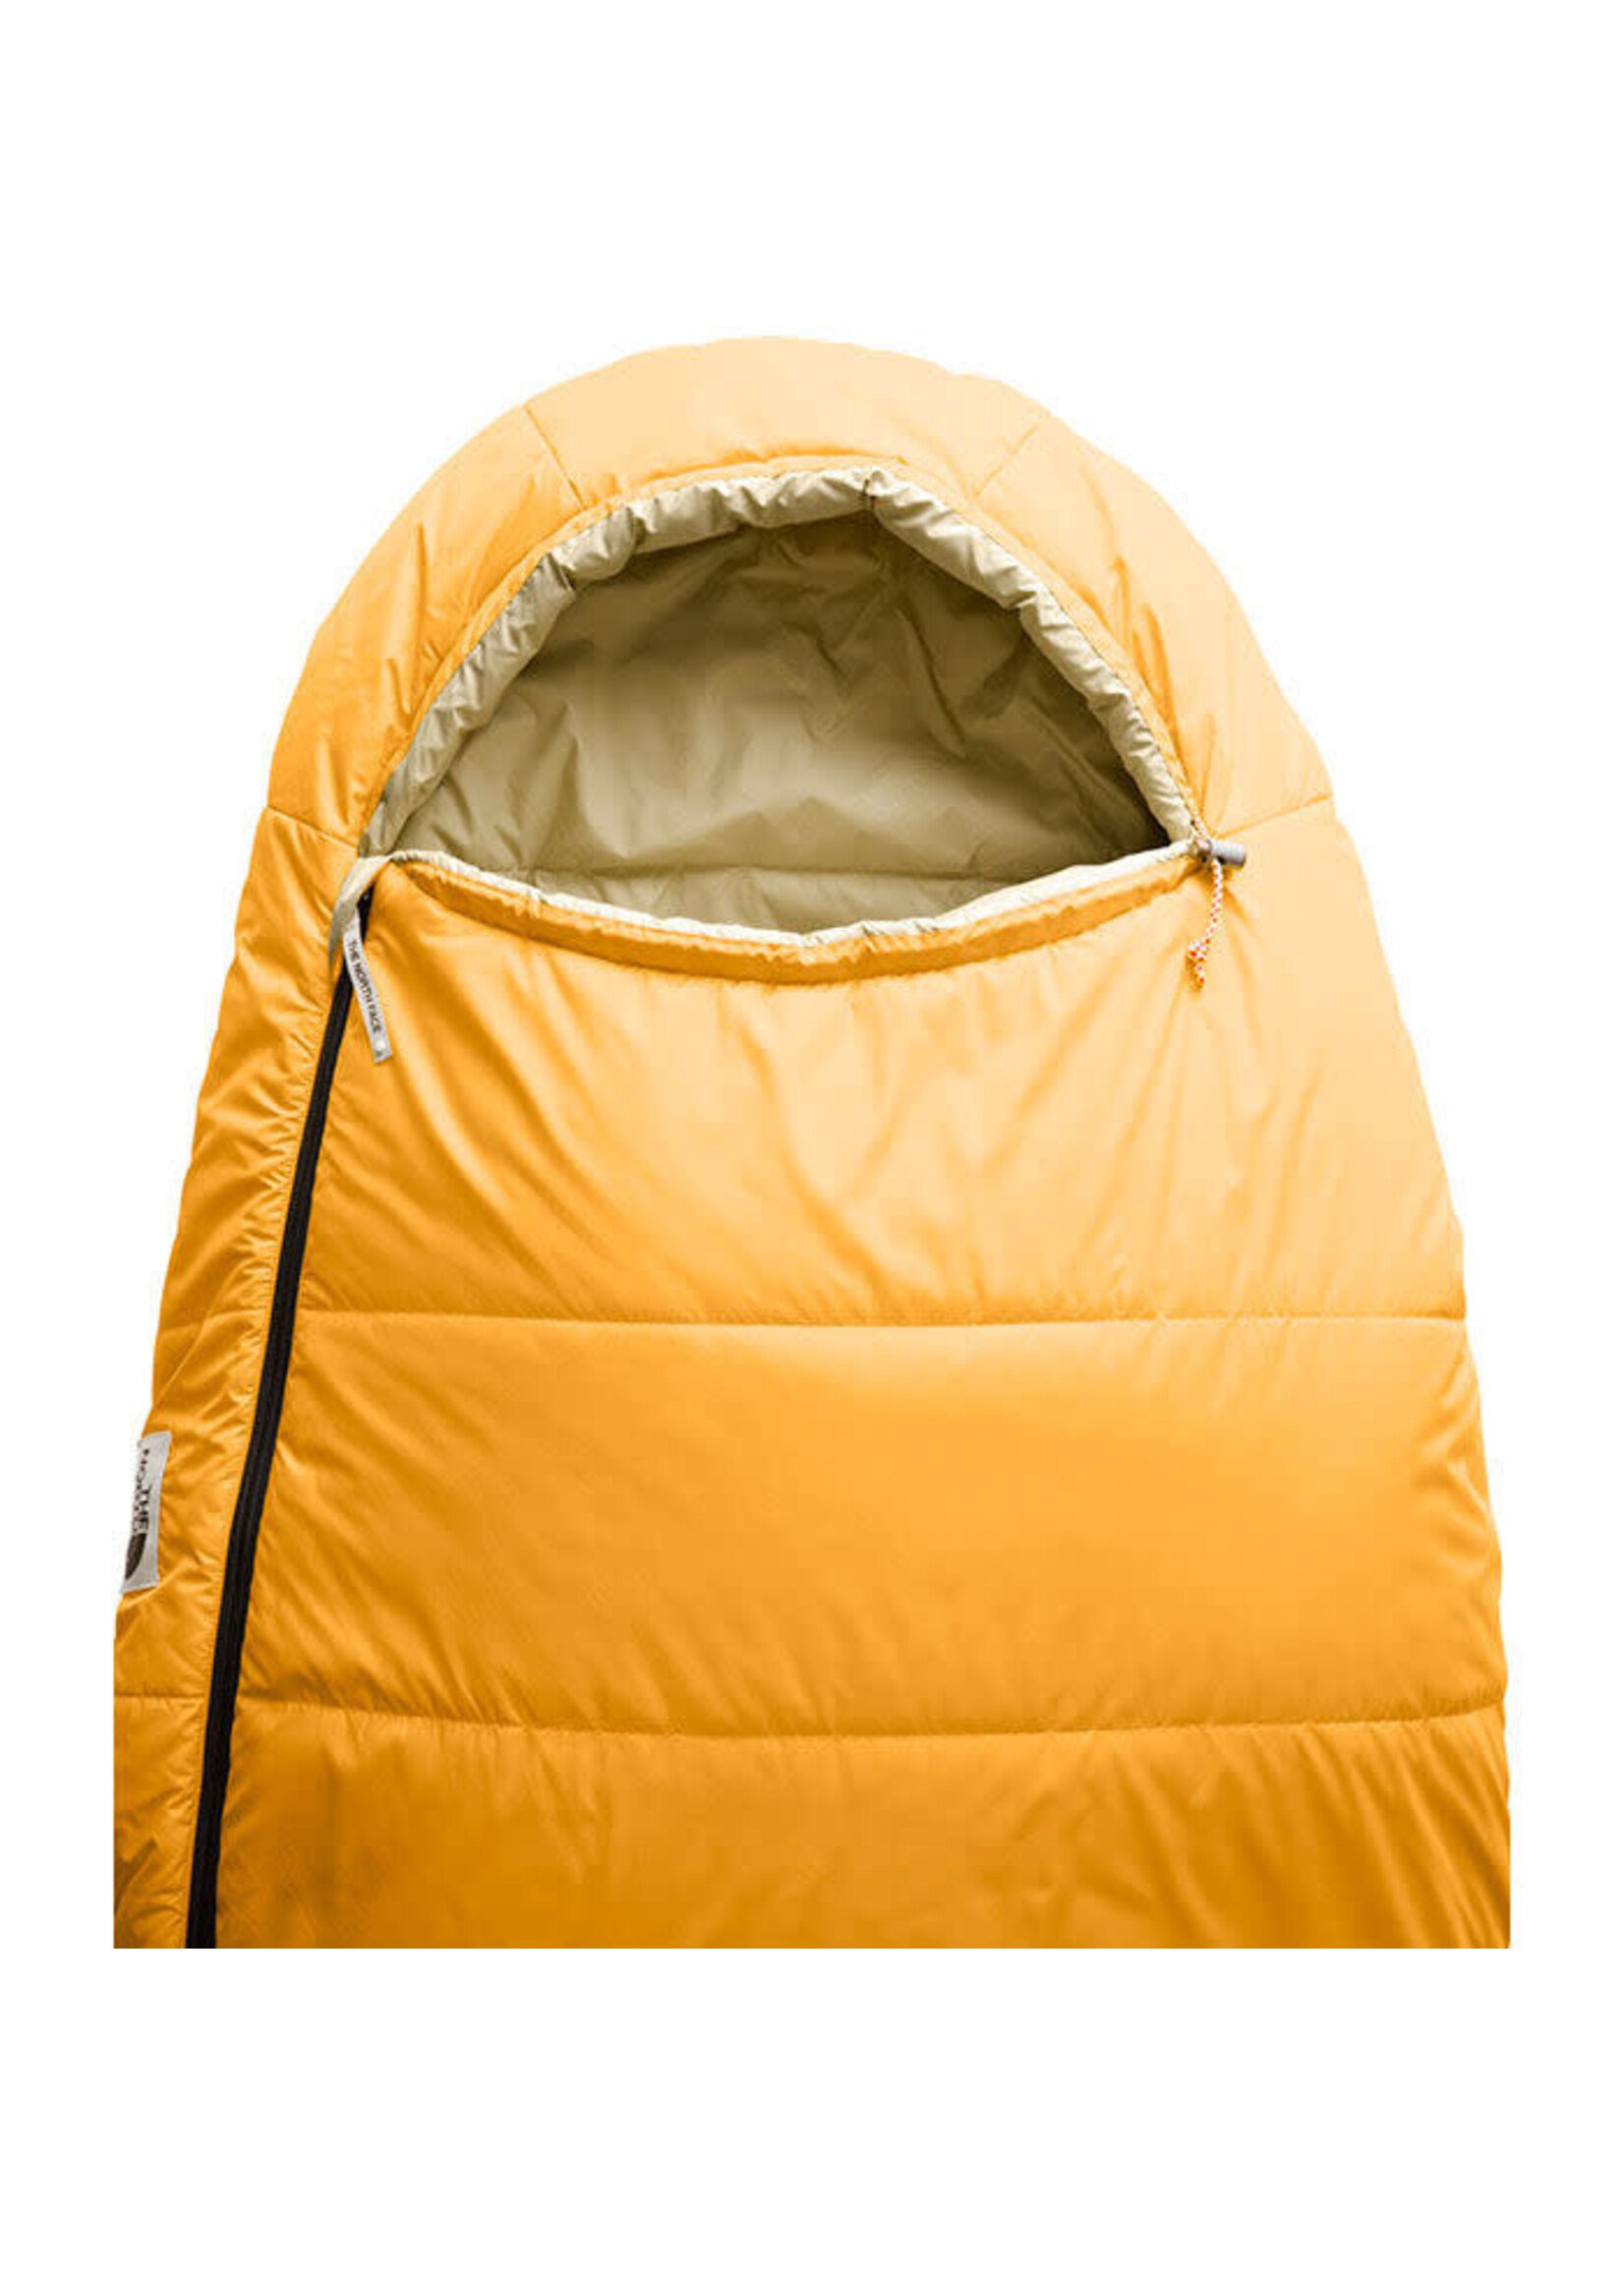 THE NORTH FACE Sac de couchage ECO TRAIL SYNTHETIC 35